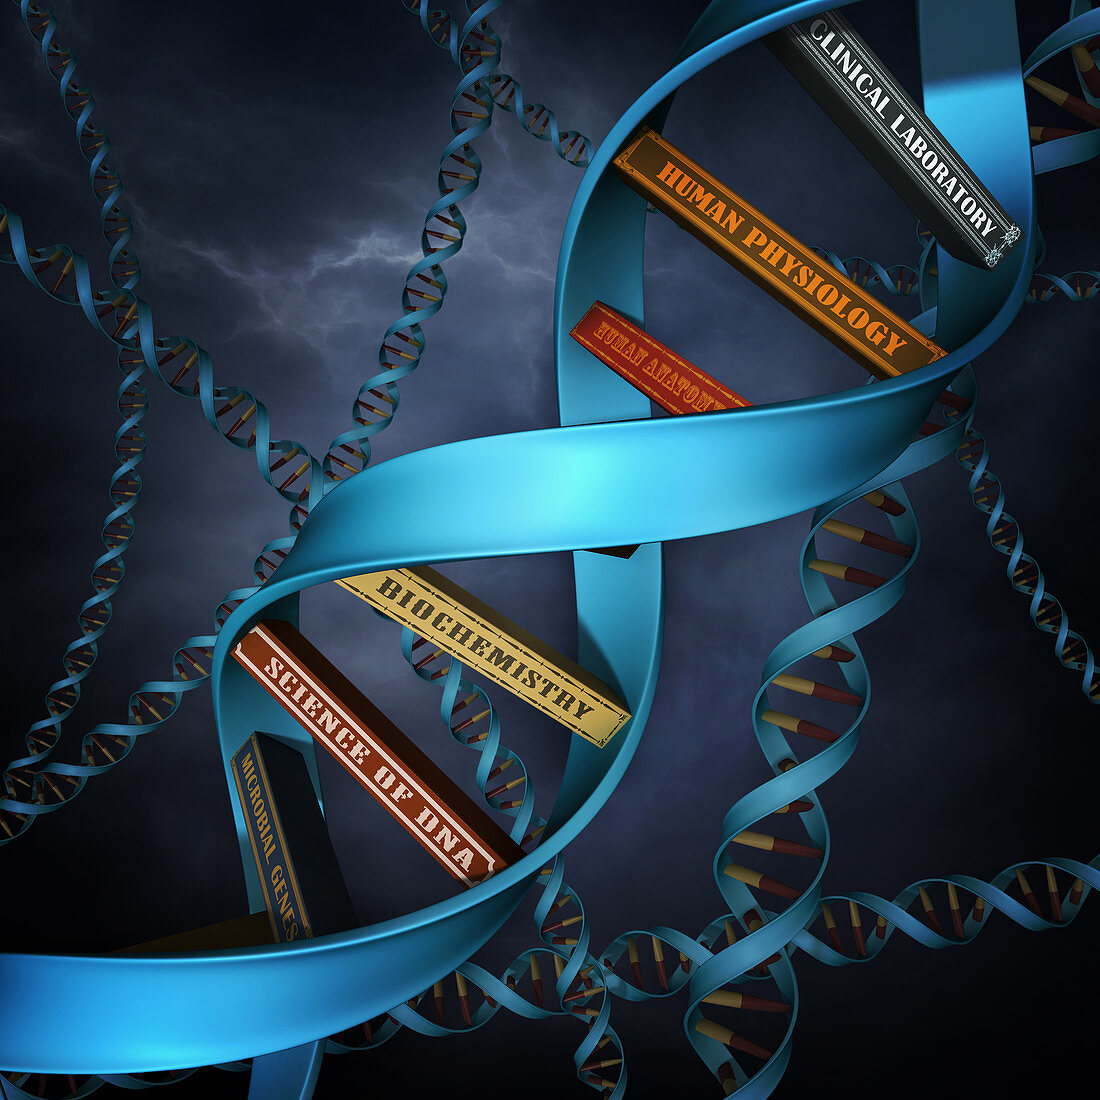 Illustration of DNA replica with books